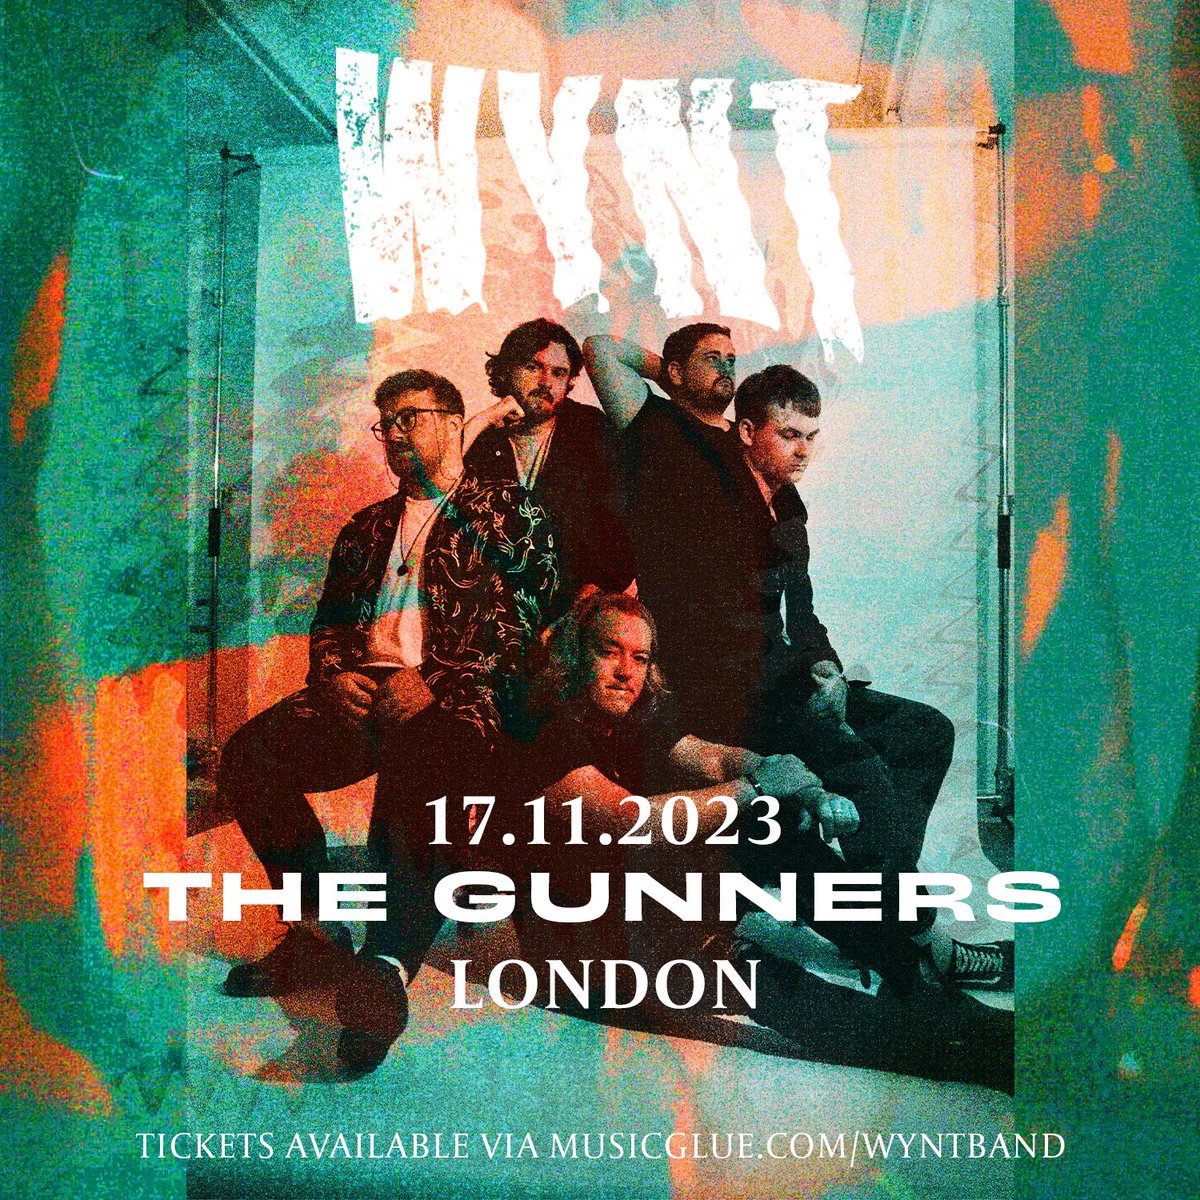 We have our FIRST EVER LONDON HEADLINER happening on November 17th It’s free entry and is going to pop offffff Hit the link to grab your tickets you legends 👇👇 dice.fm/event/pda6y-wy… #LondonEvents #LiveMusicLondon #NewMusic